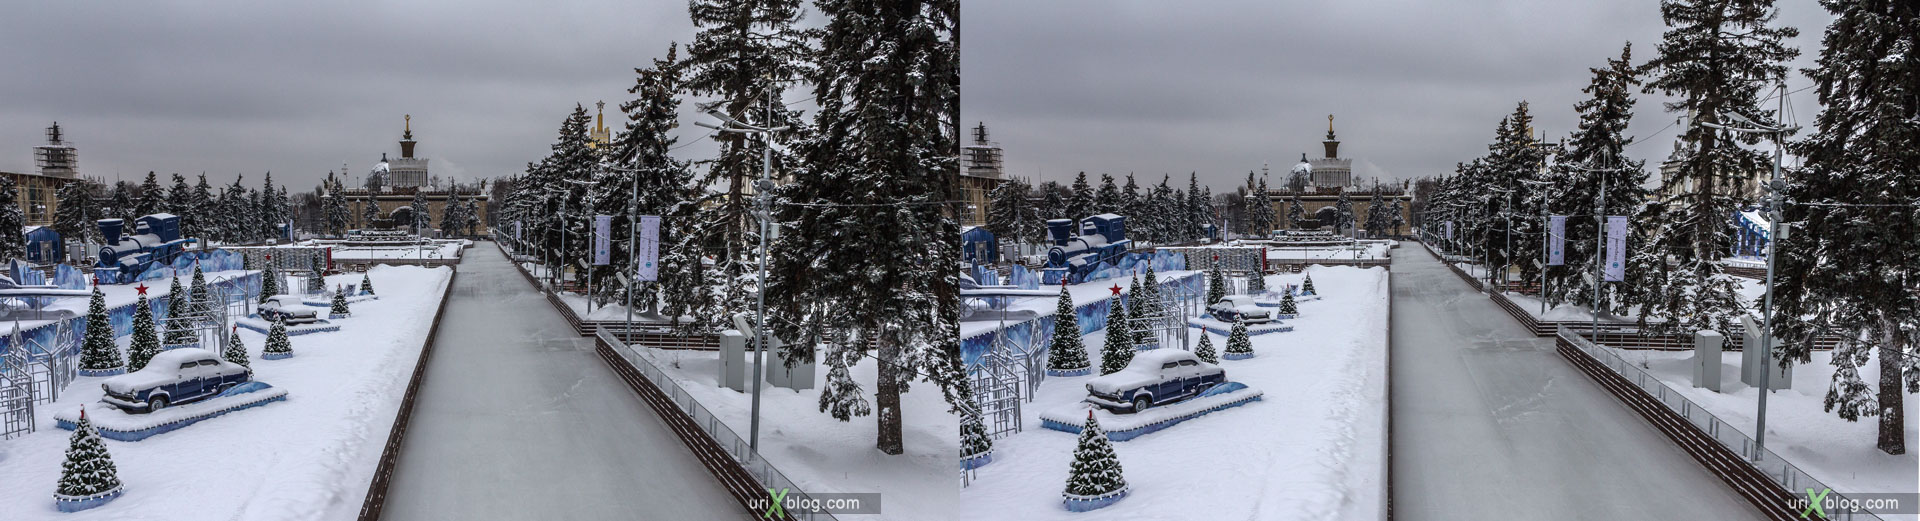 Skating-rink, VDNKh, VVTs, park, winter, ice, snow, Moscow, Russia, 3D, stereo pair, cross-eyed, crossview, cross view stereo pair, stereoscopic, 2015